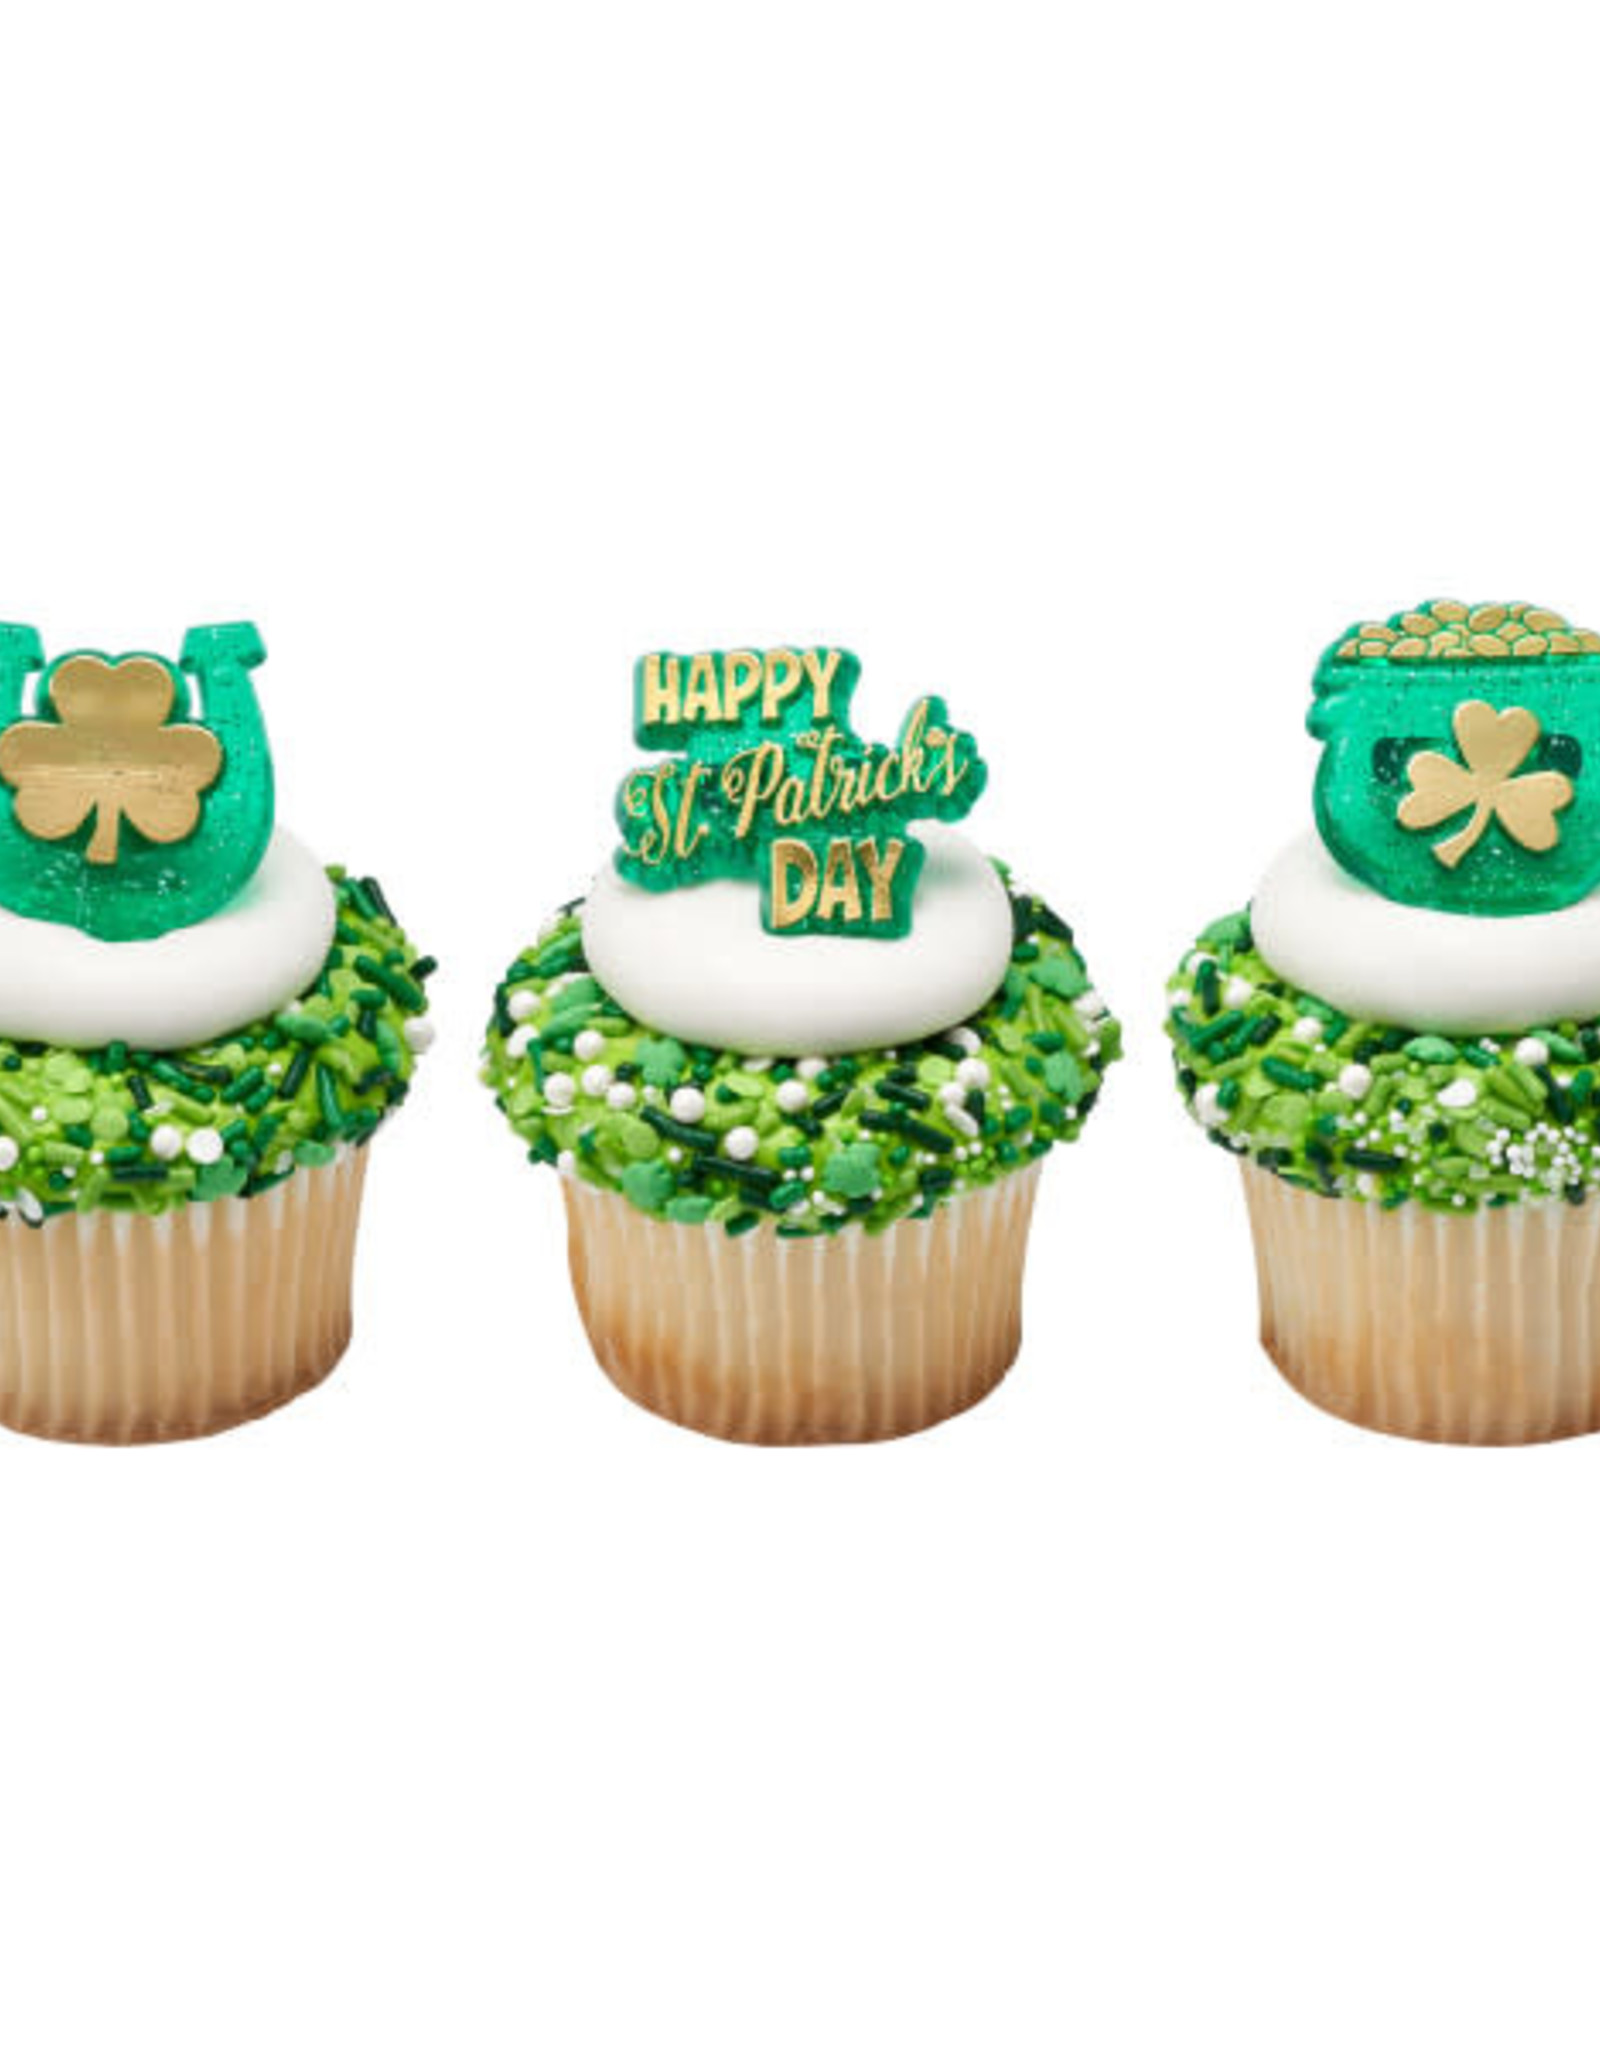 Pot of Gold Assorted Cupcake Rings (12ct)